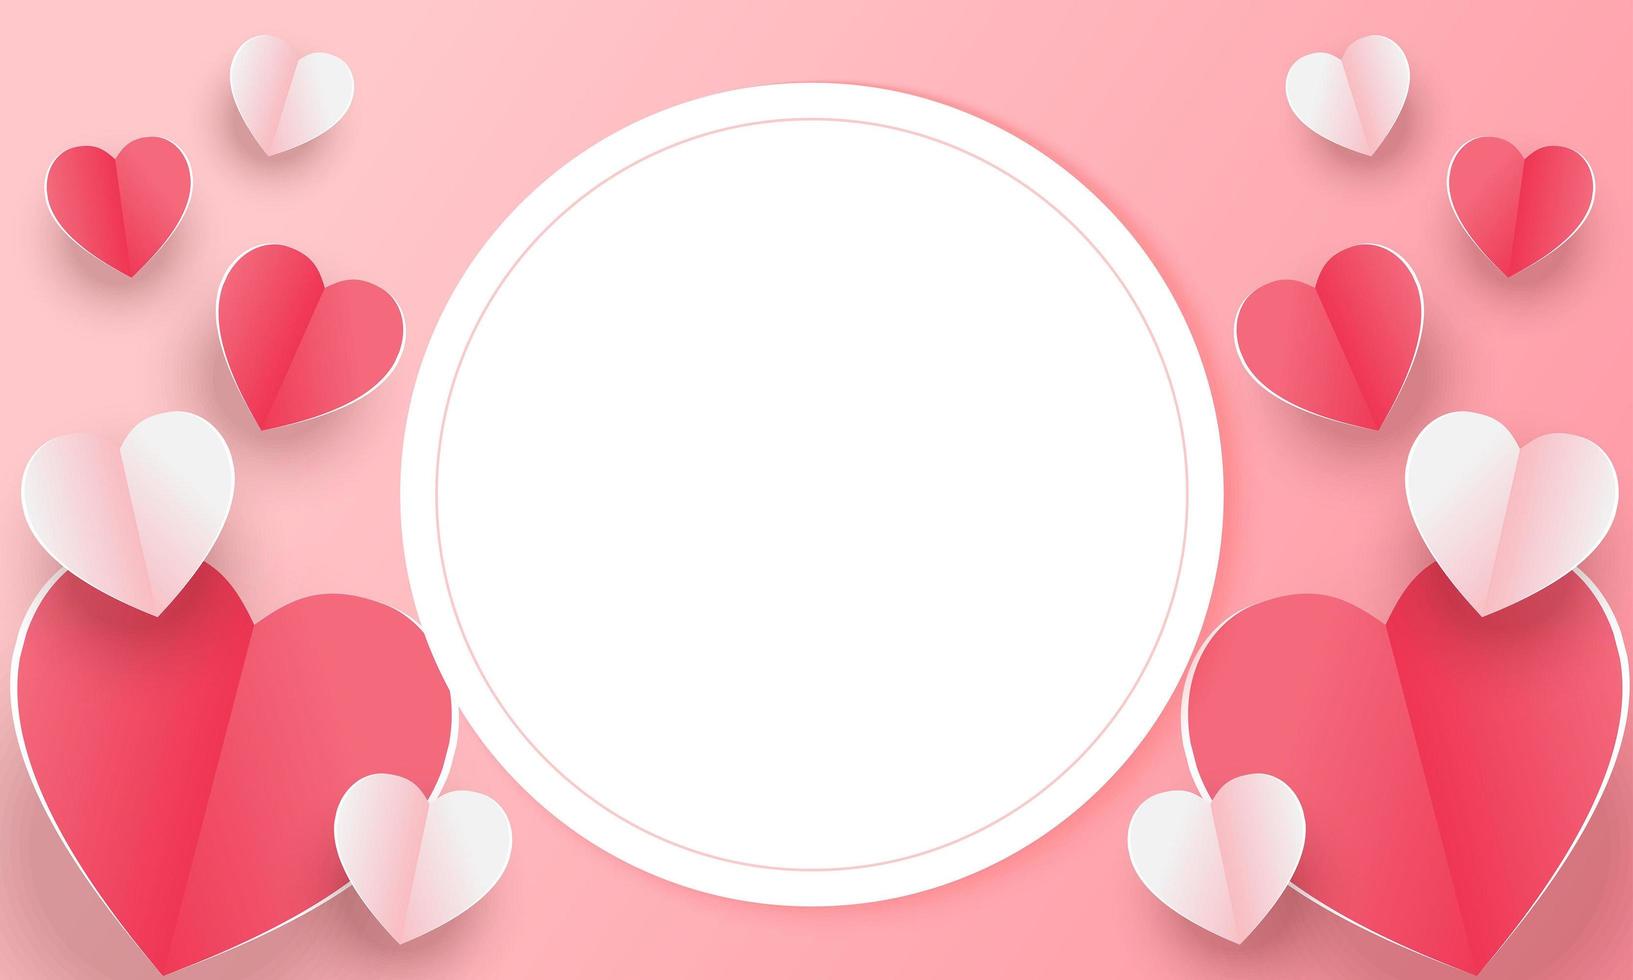 Valentine's day concept background. Vector illustration. 3d red and pink paper hearts with white square frame. Cute love sale banner or greeting card